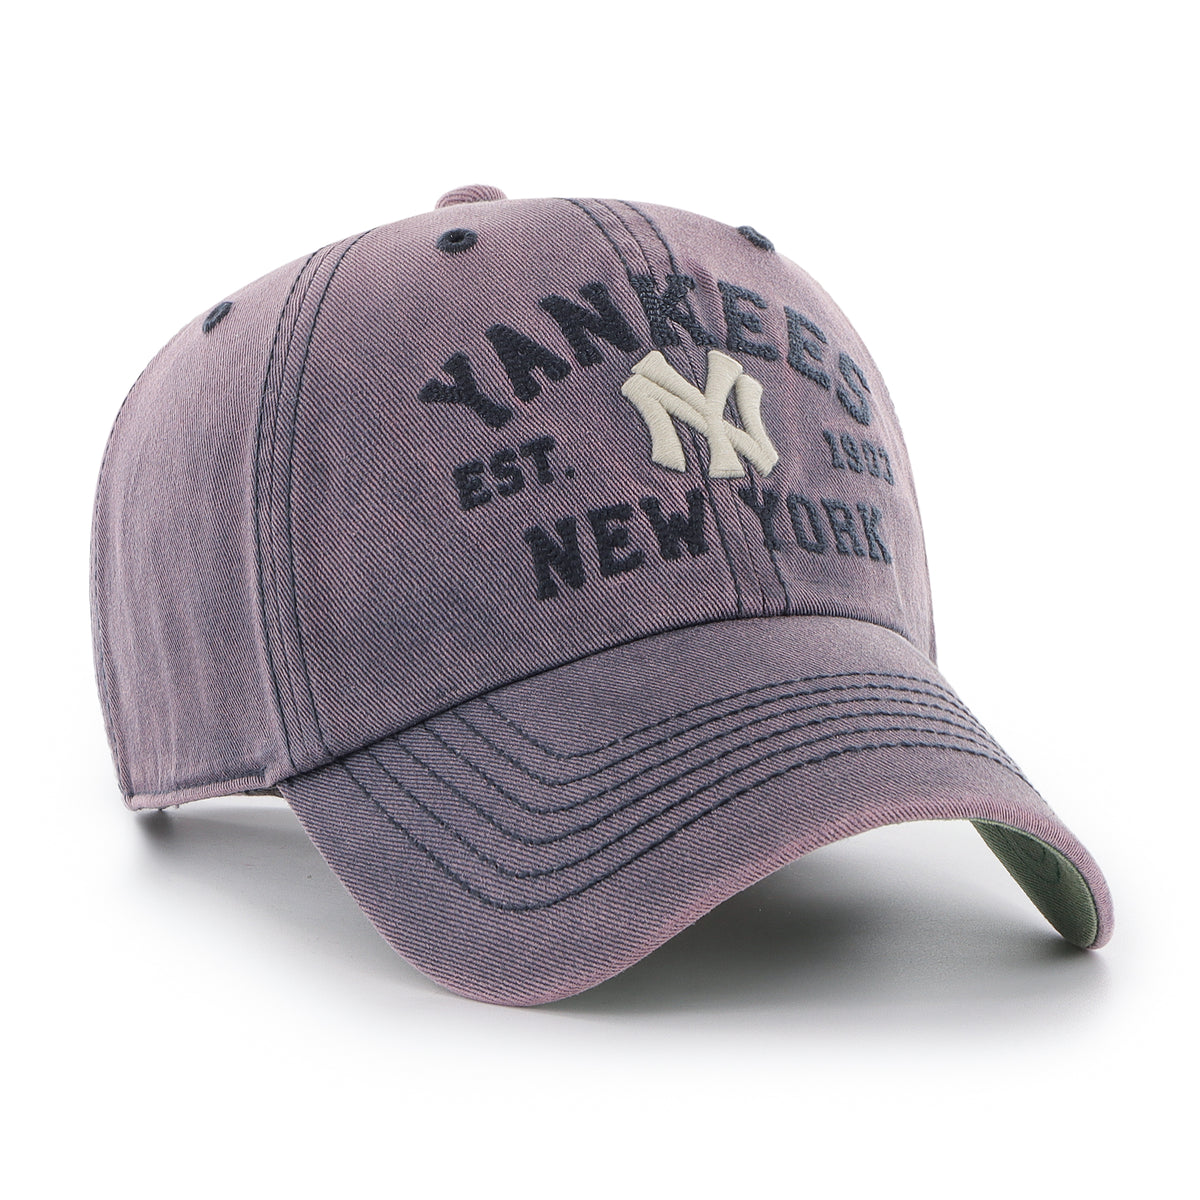 NEW YORK YANKEES COOPERSTOWN DUSTED STEUBEN '47 CLEAN UP